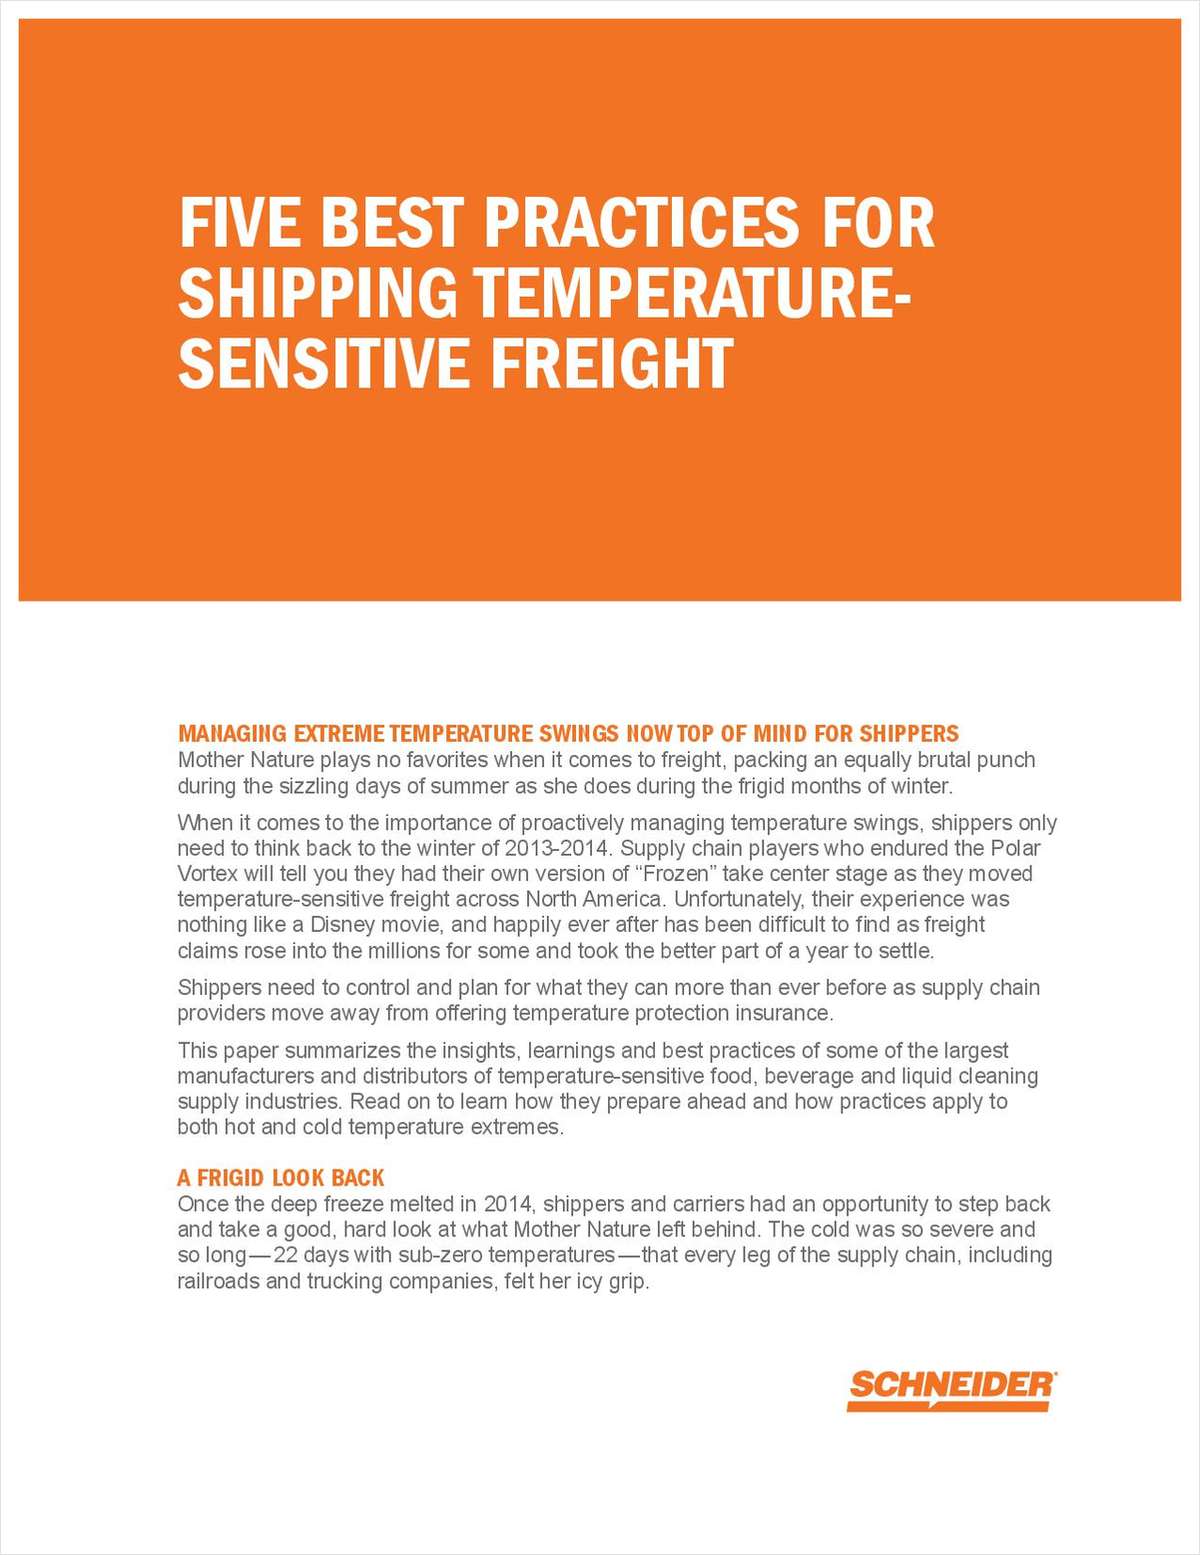 Five Best Practices the Polar Vortex Taught Shippers About Temperature Protection